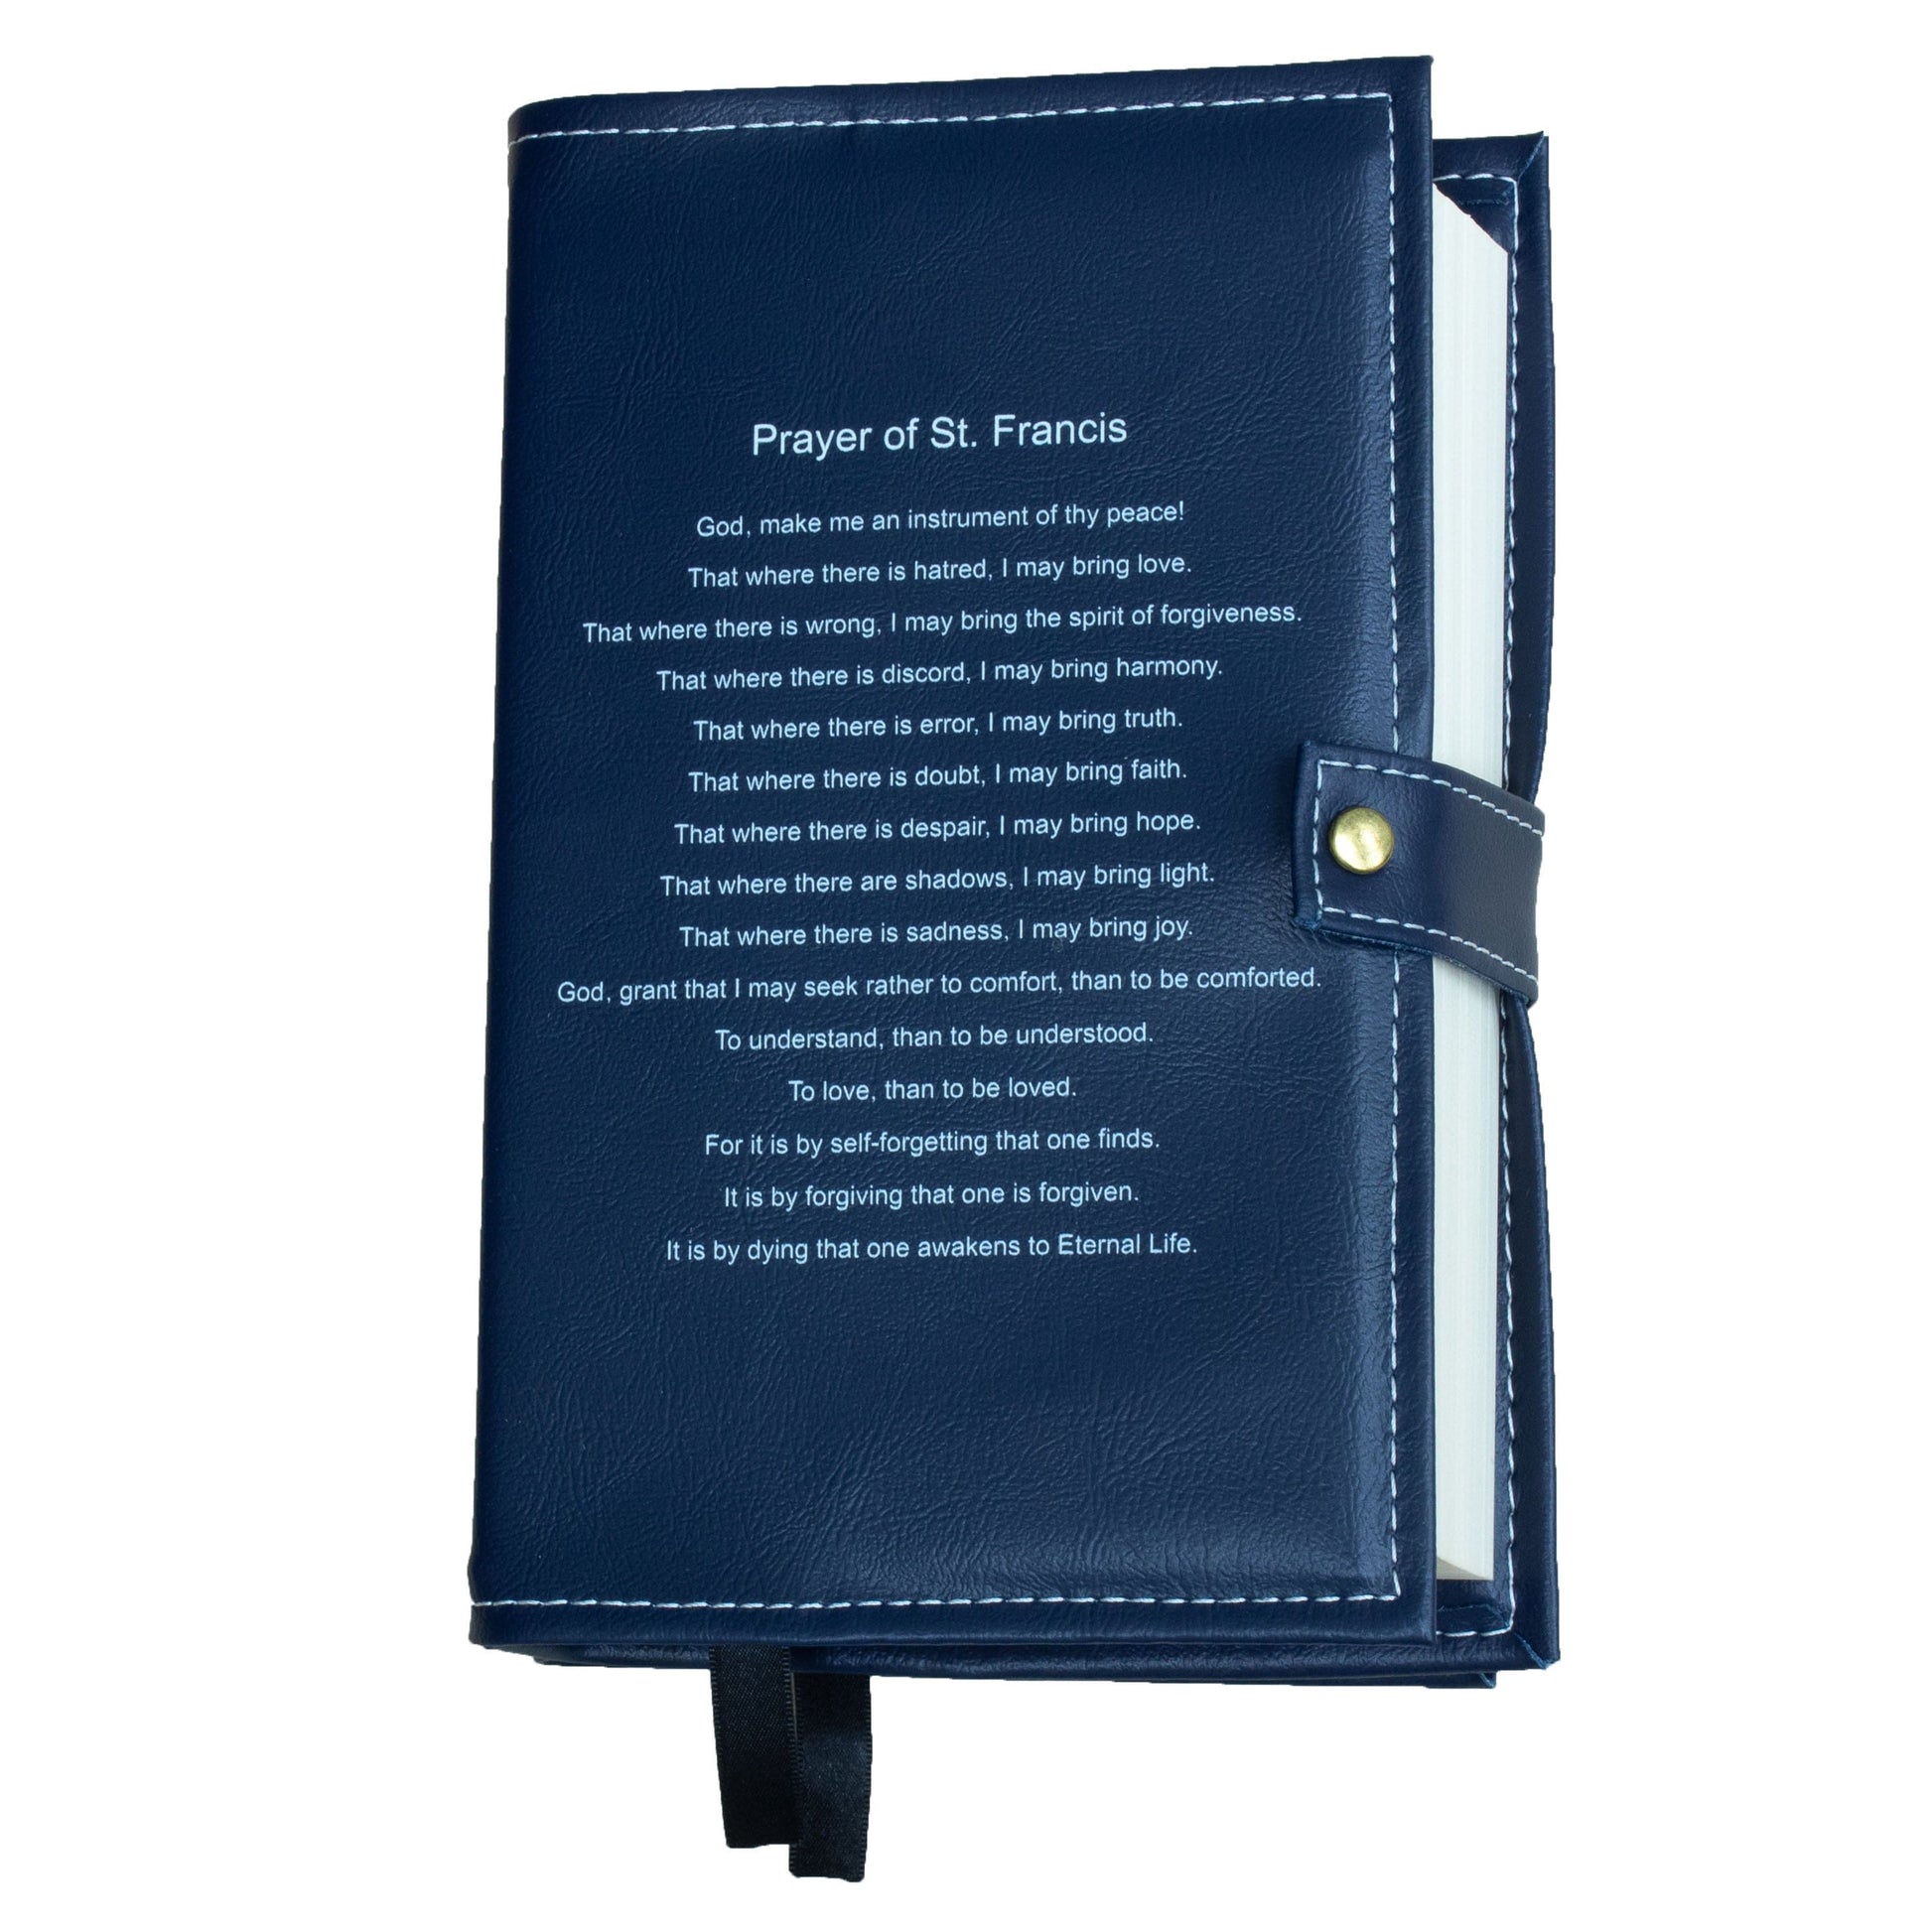 St. Francis Prayer Navy Blue Double Book Cover